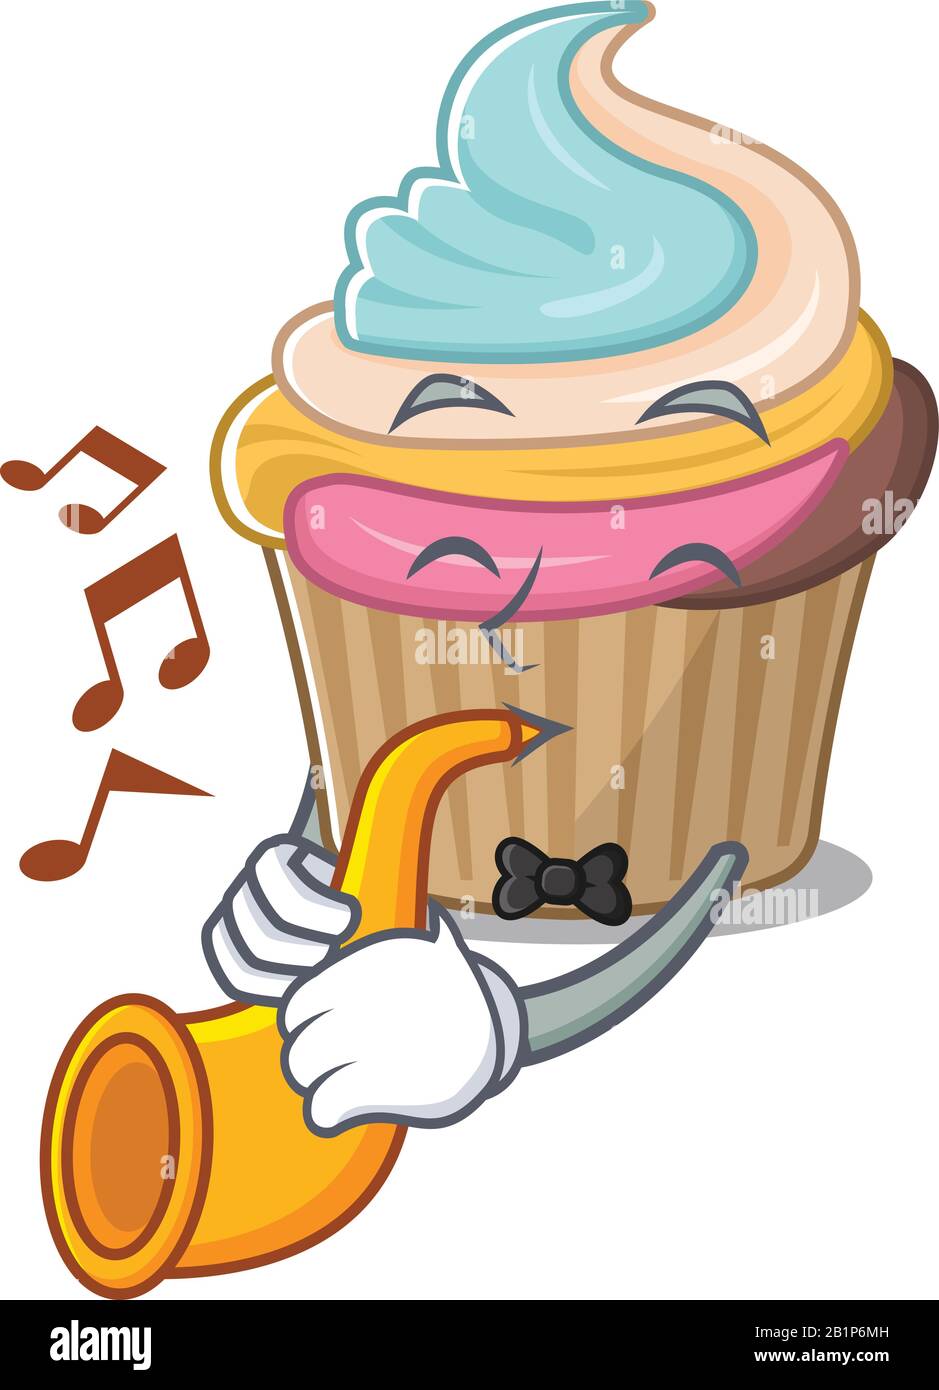 mascot design concept of rainbow cupcake playing a trumpet Stock Vector